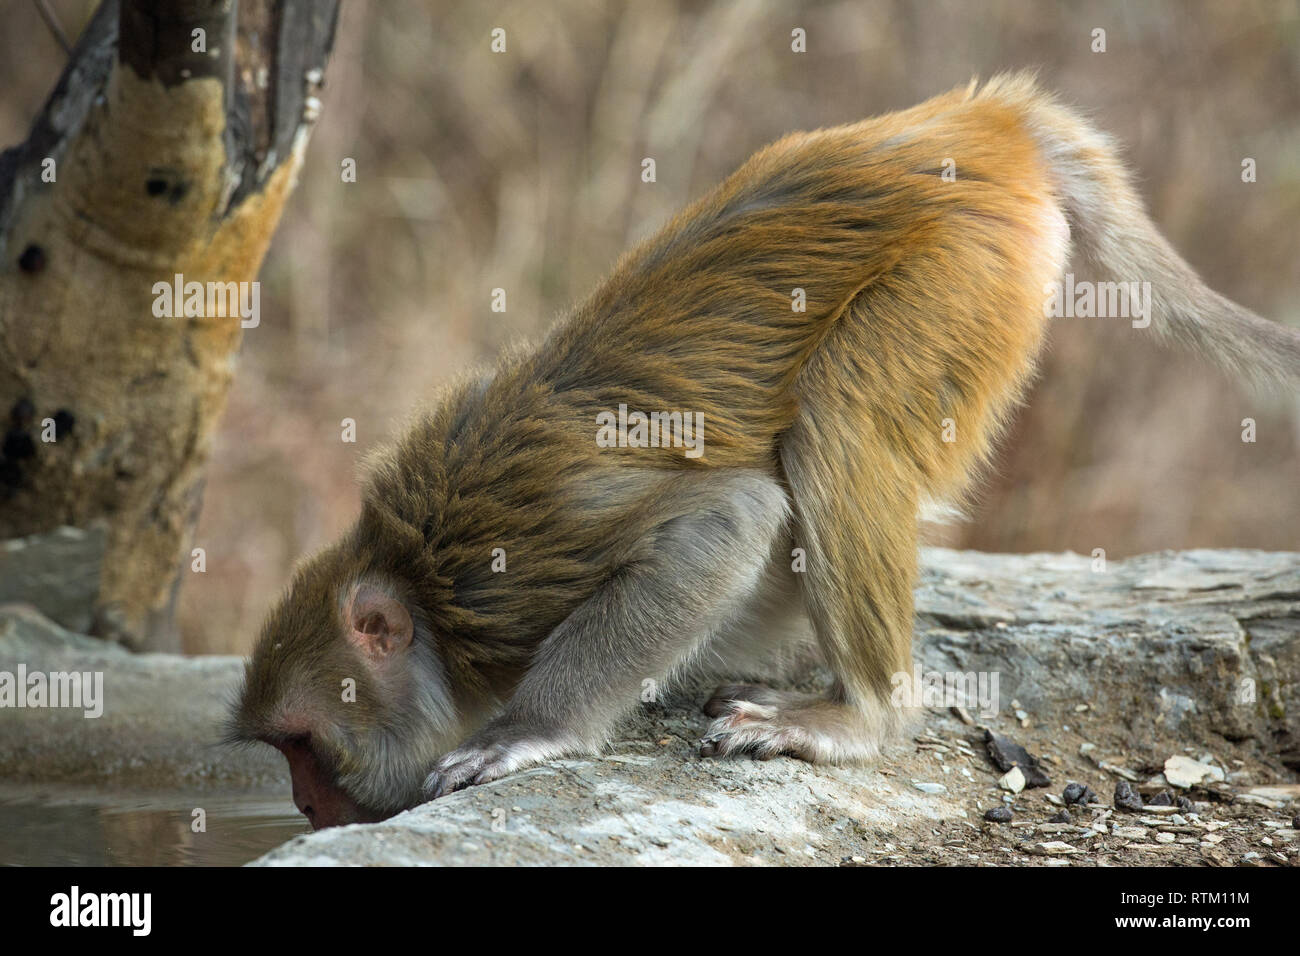 Rhesus Macaque (Macaca mulatta). Leaning forward on all fours, four feet, in order to drink water from a pool. Northern India. Stock Photo